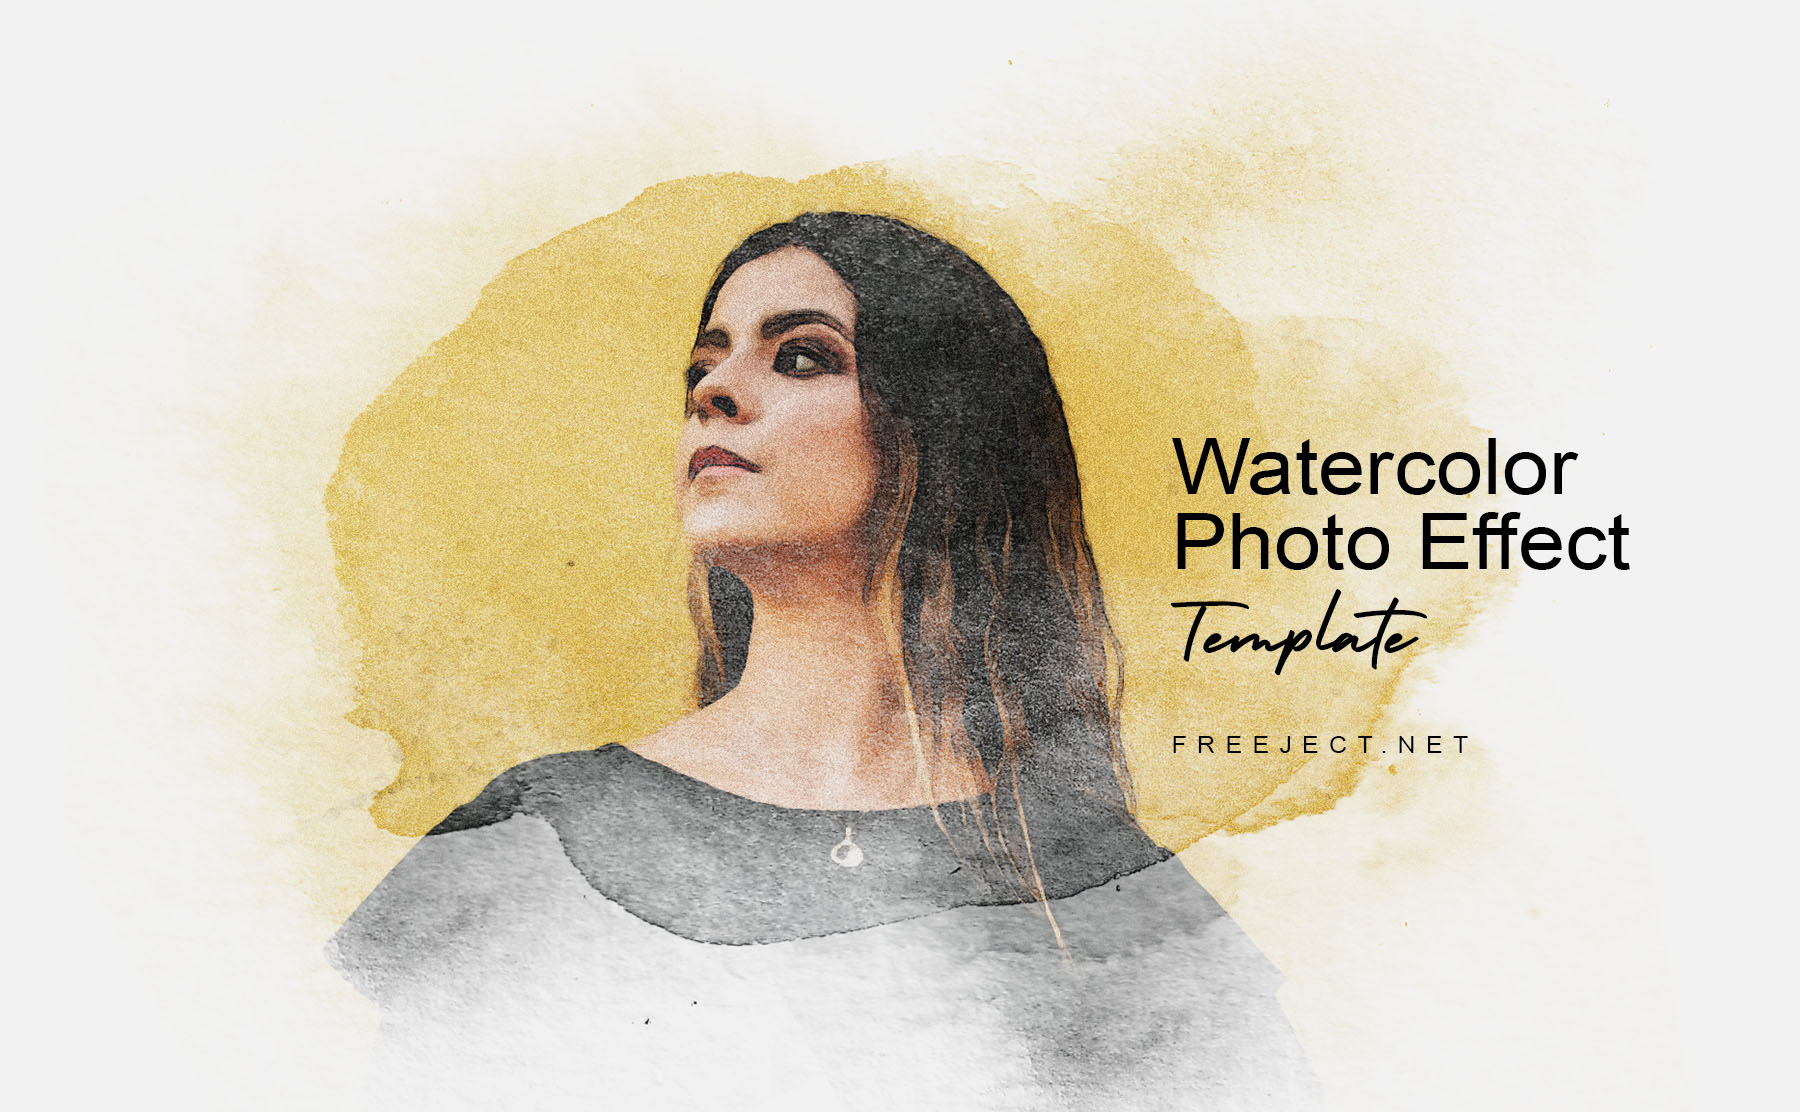 Free Watercolor Photo Effect Template Vol 2